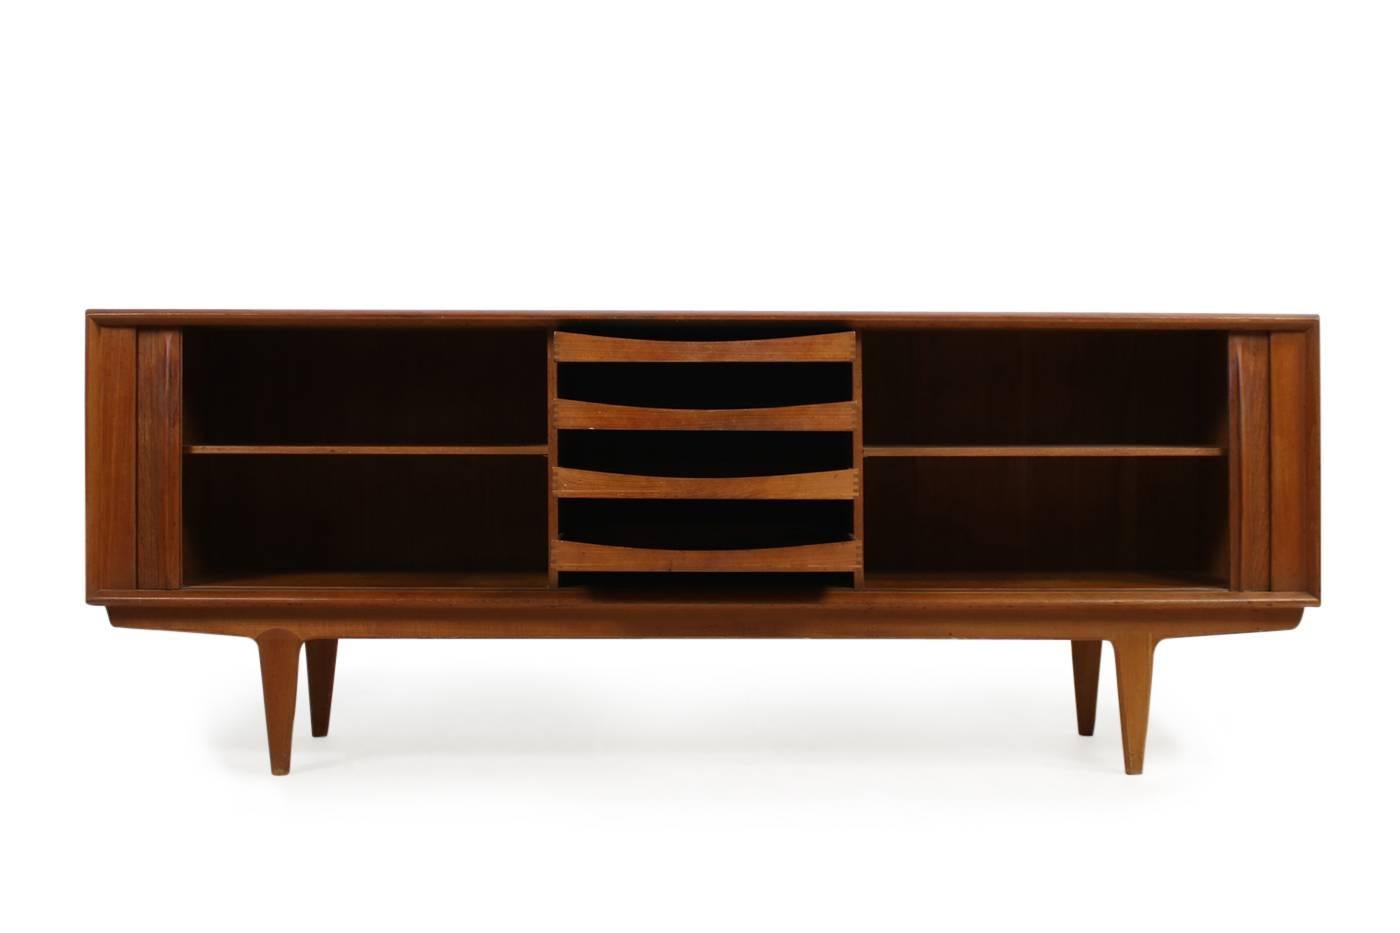 Beautiful 1960s Danish modern design by Bernhard Pedersen & Son (BPS) sideboard made of Teak Wood.
Beautiful condition, also very clean from the inside. Tambour doors work perfect, drawers and shelves inside.